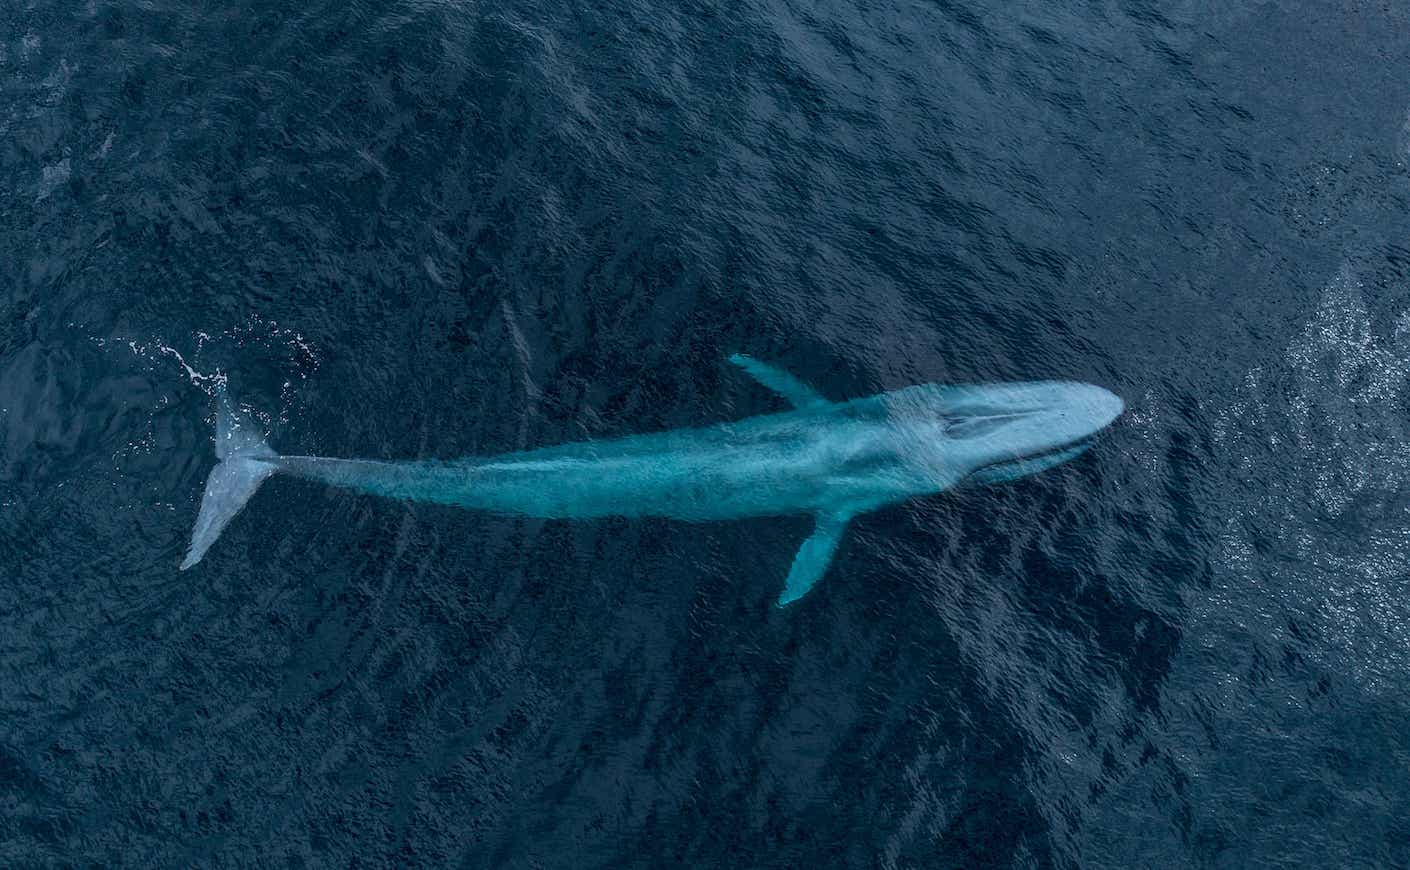 blue whale from Paul Nicklen's drone